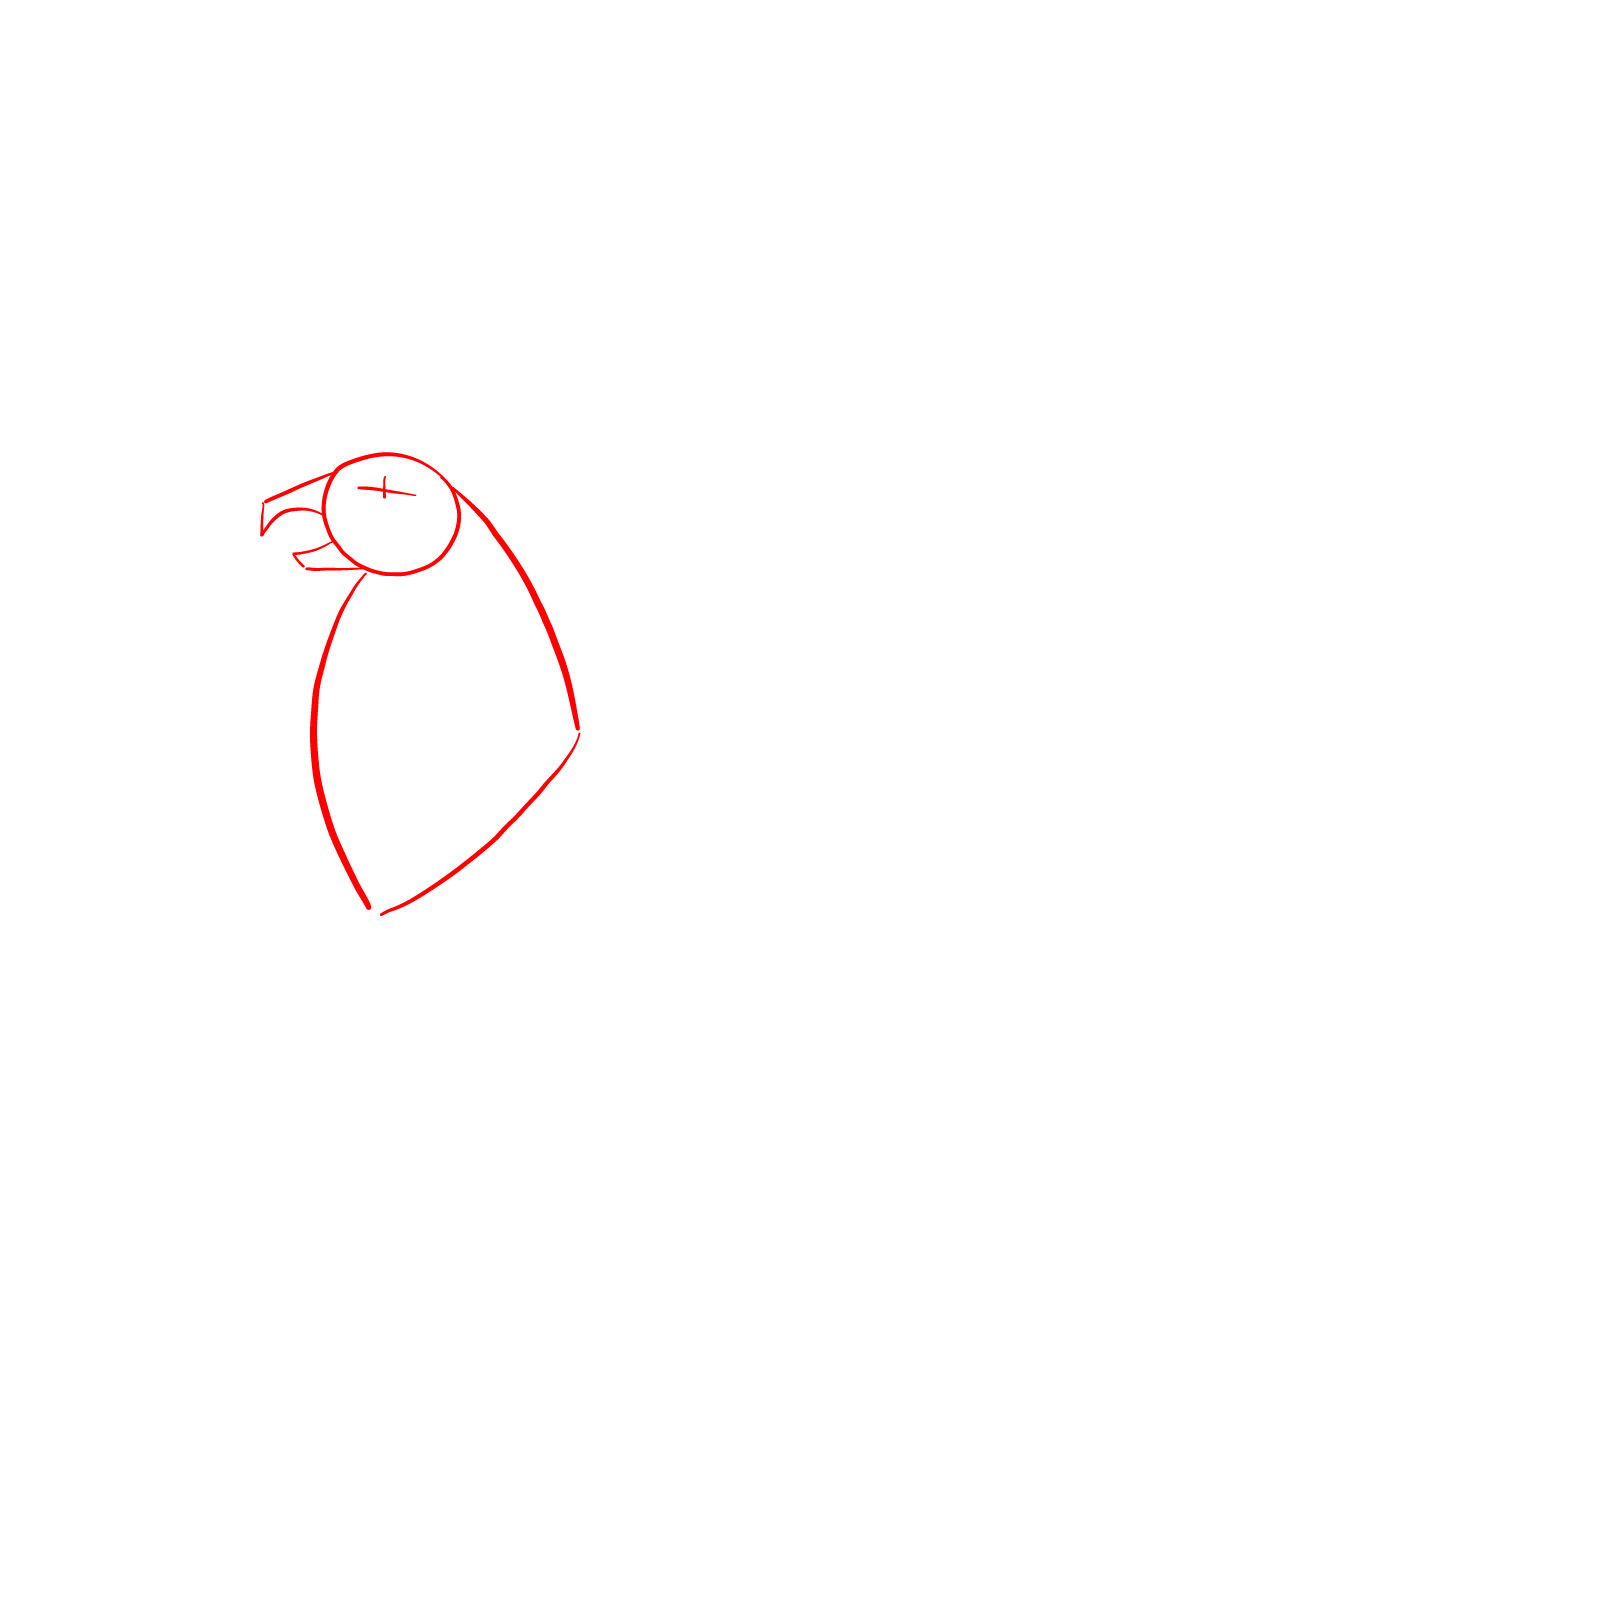 How to draw a Gryphon - step 01